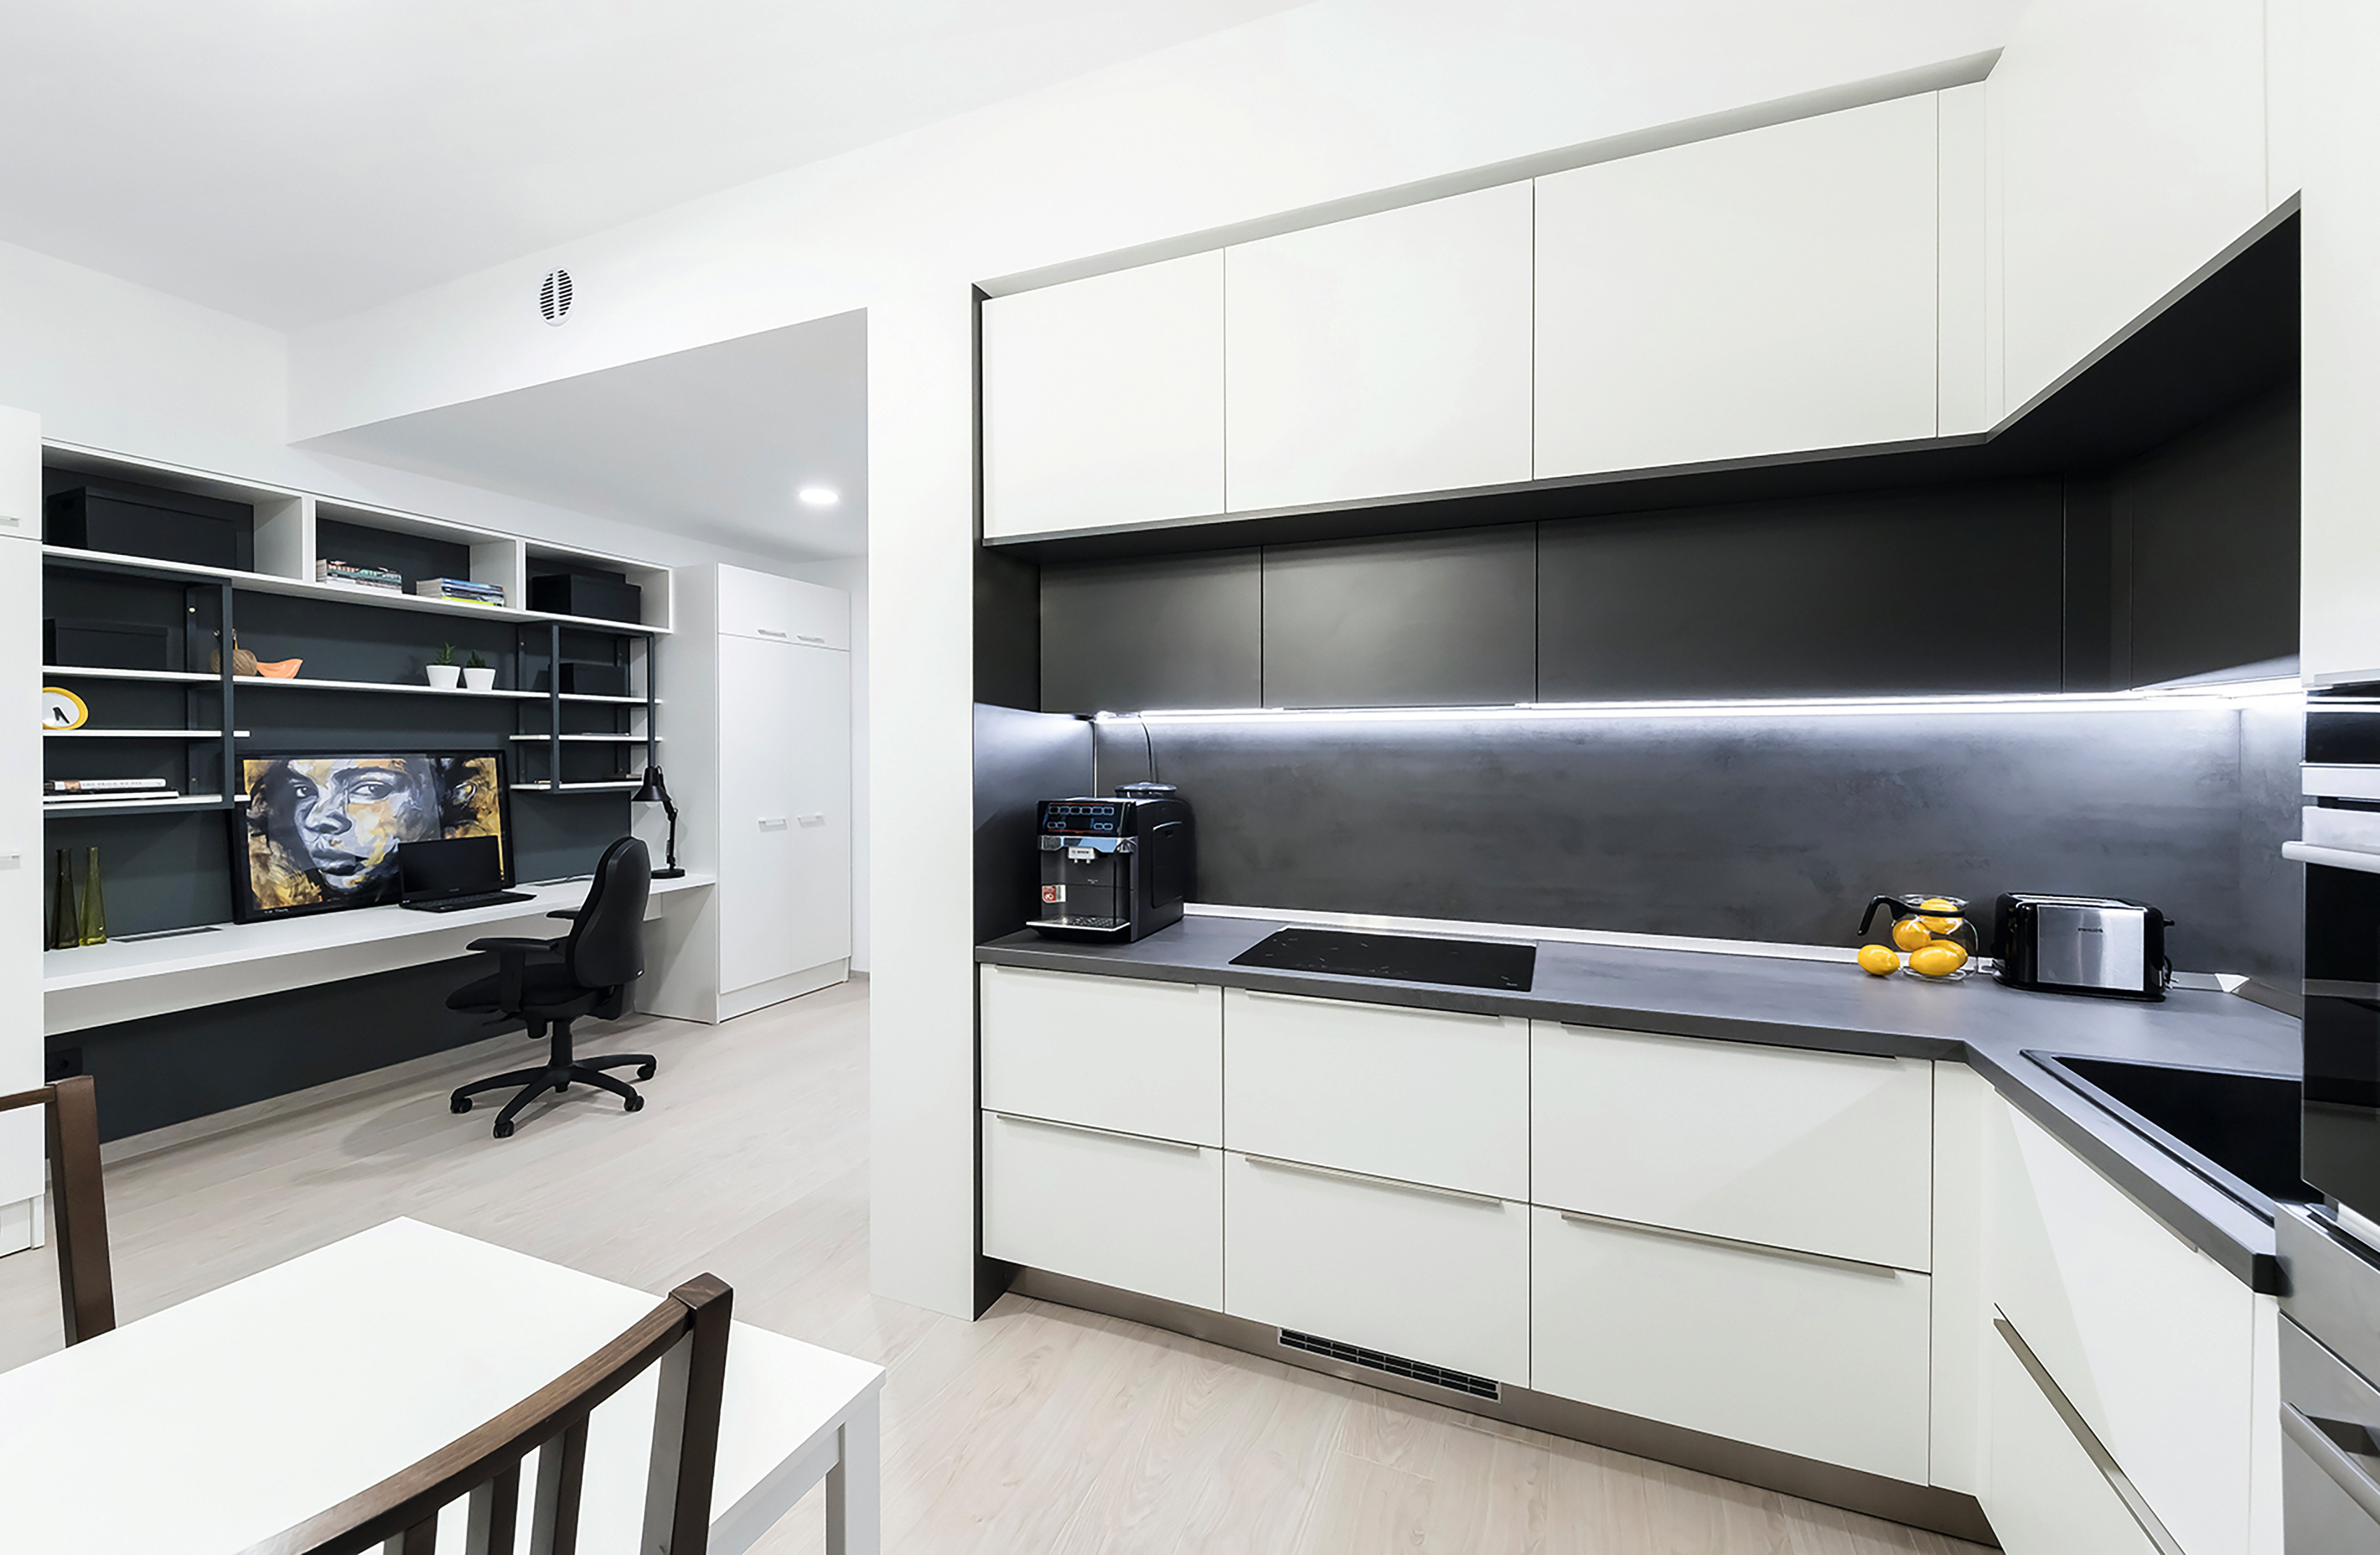 The bright white kitchen was created with W1000 Premium White, while U963 ST9 Diamond Grey on the lower cabinets and F641 ST10 Chromix Anthracite on the countertop provide contrast and depth.